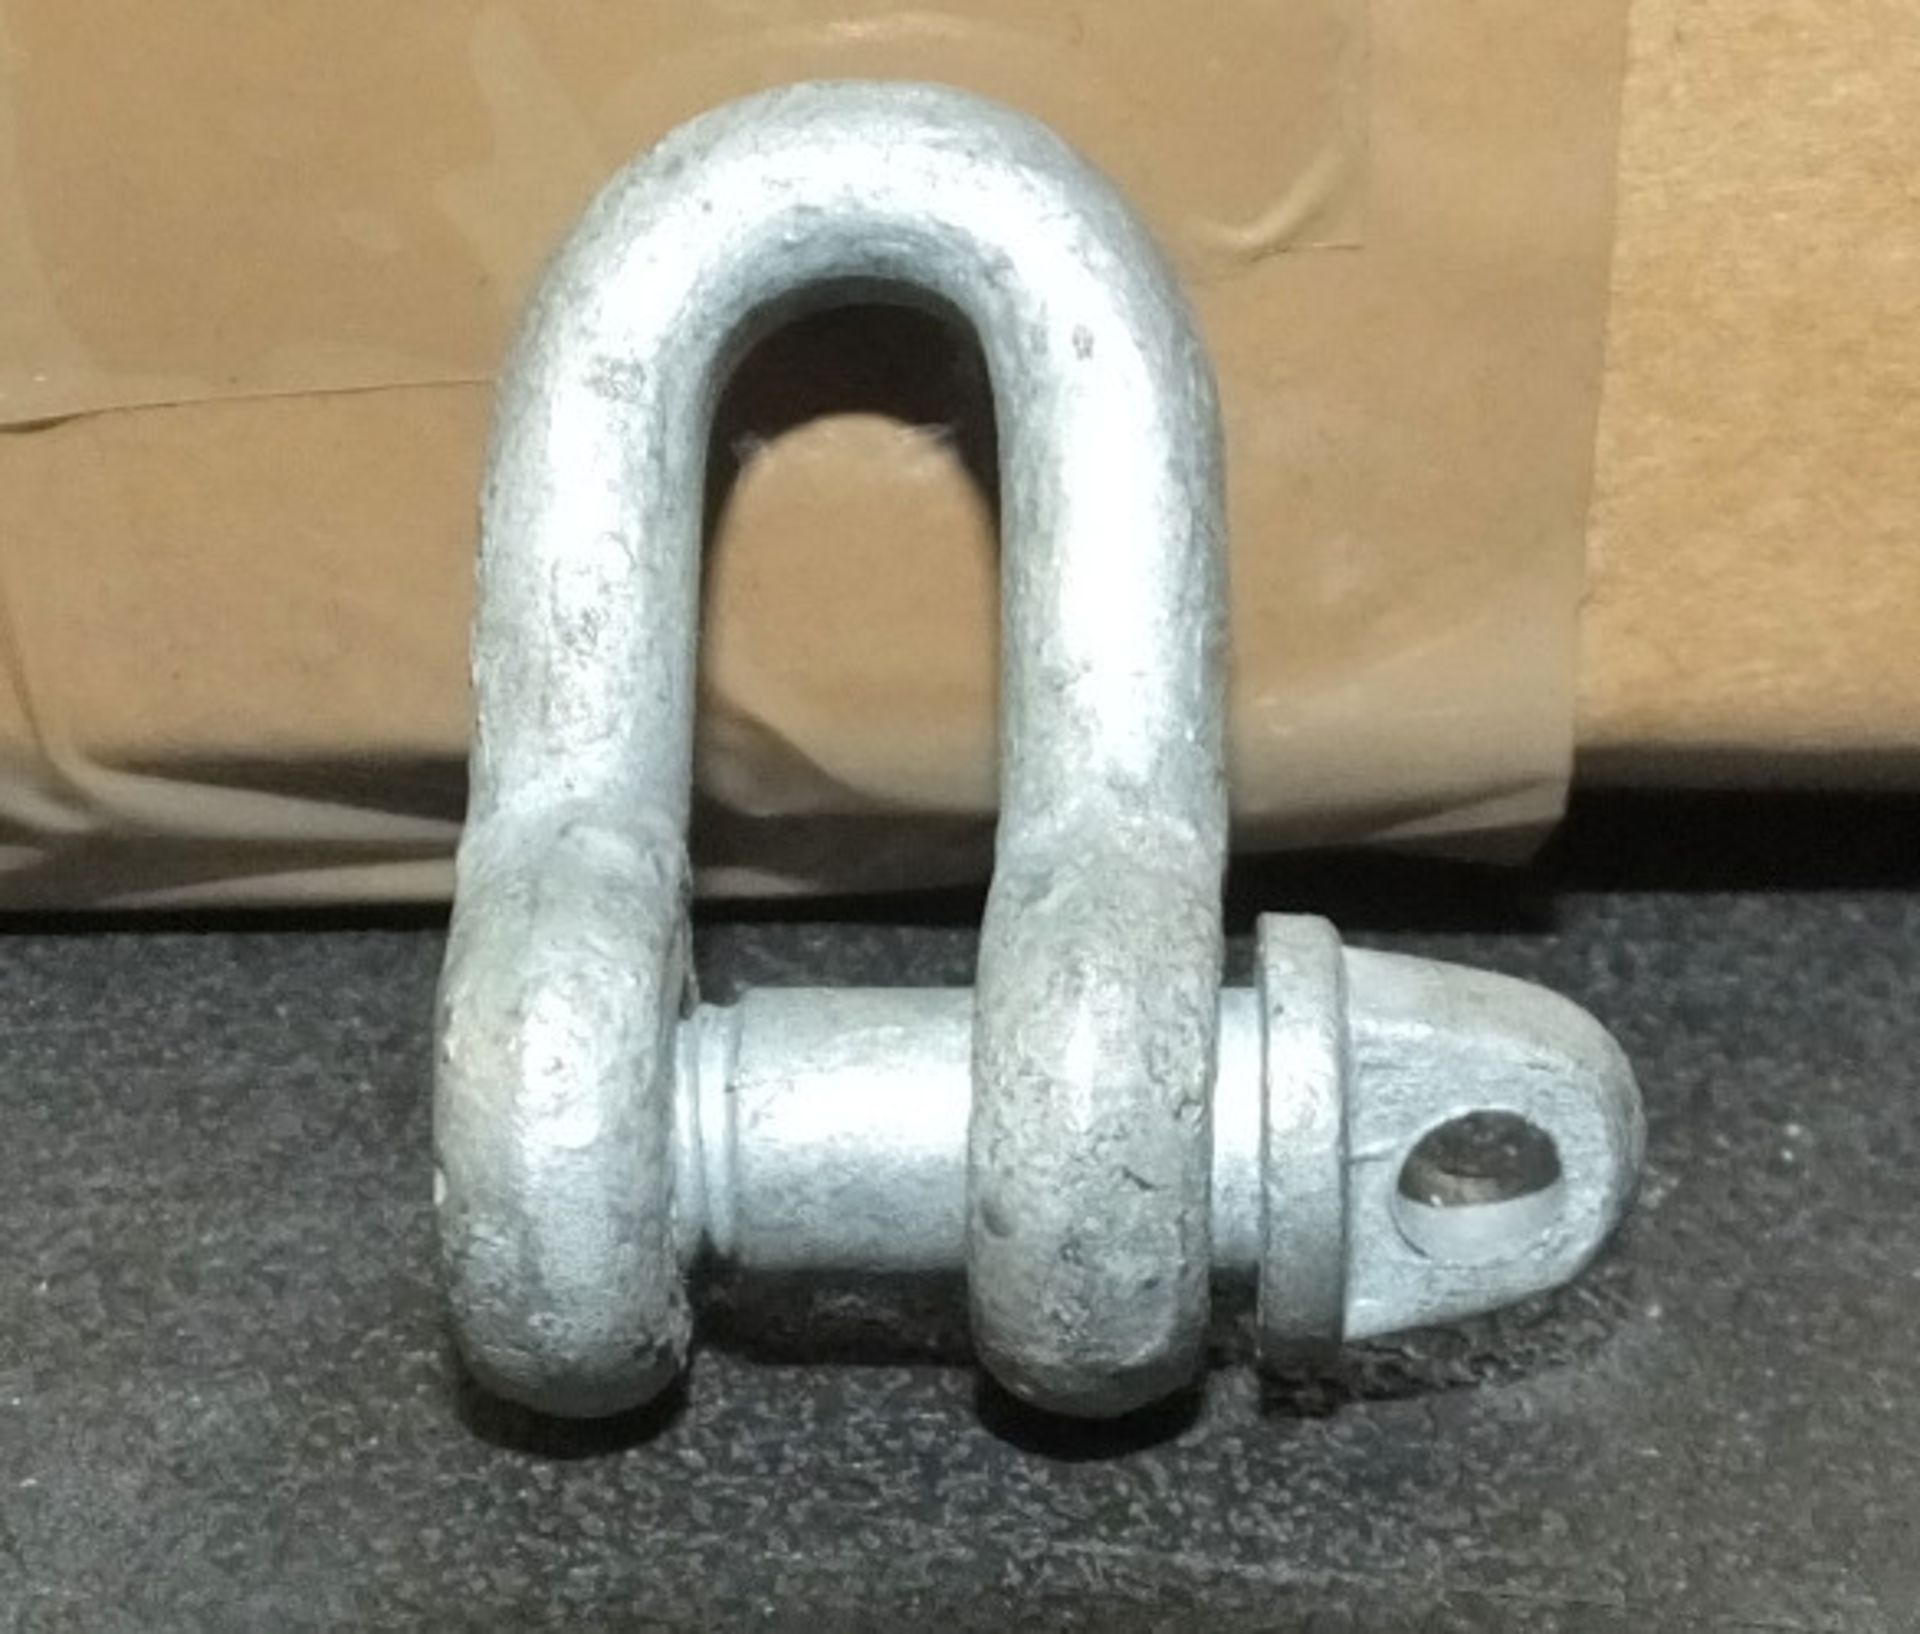 25x Key Industrial 1/4-3/8 Galvanised Small D-Shackles 6CWT - Image 3 of 3